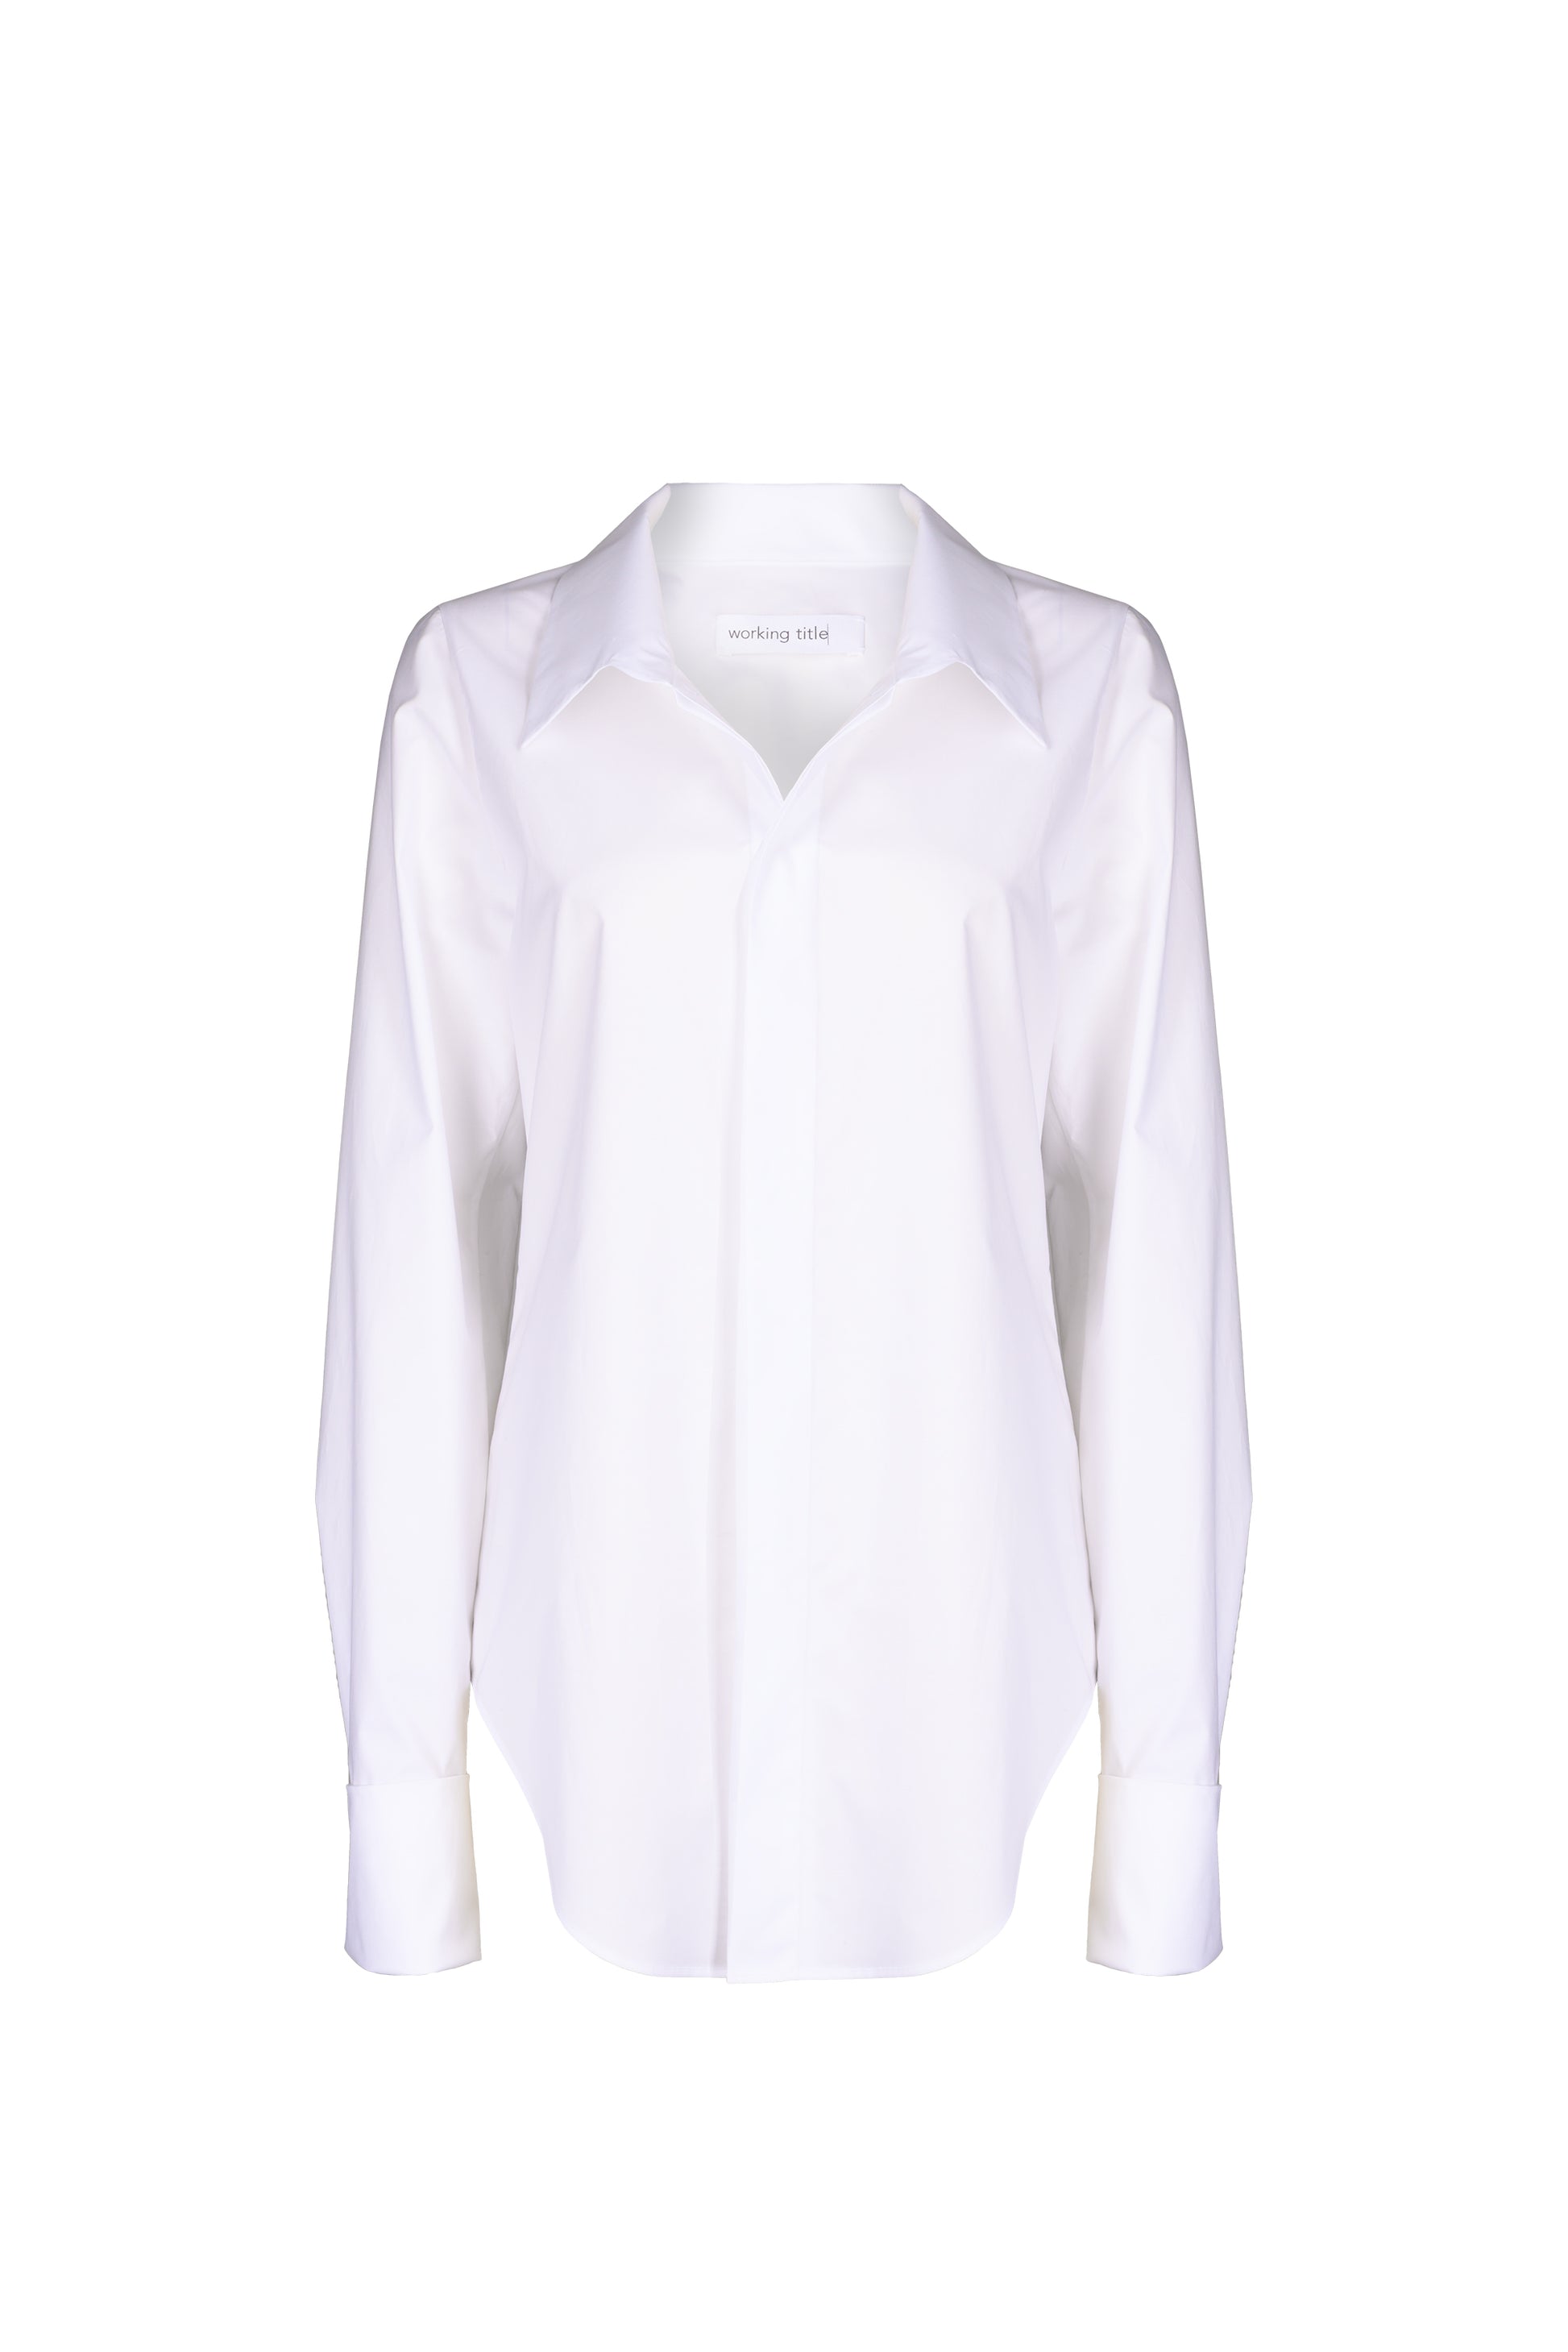 Sophisticated white slim-fit shirt made from the finest Italian organic cotton, featuring a crisp collar and broad cuffs for a polished, versatile style.